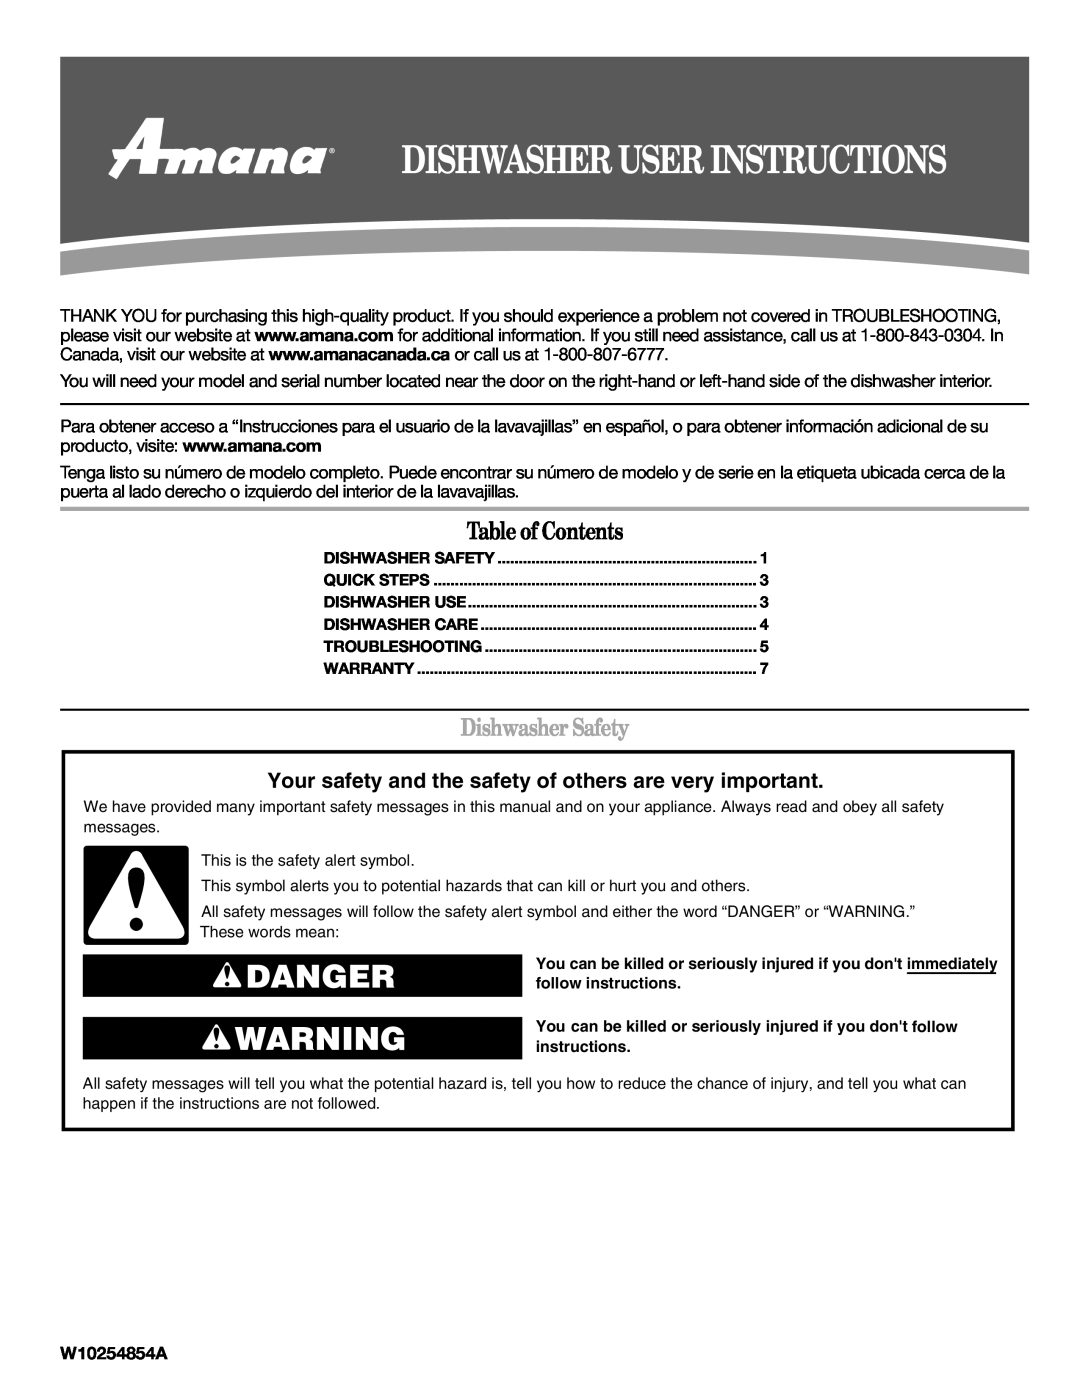 Amana W10254854A warranty Dishwasher User Instructions, Danger, Table of Contents, Dishwasher Safety 